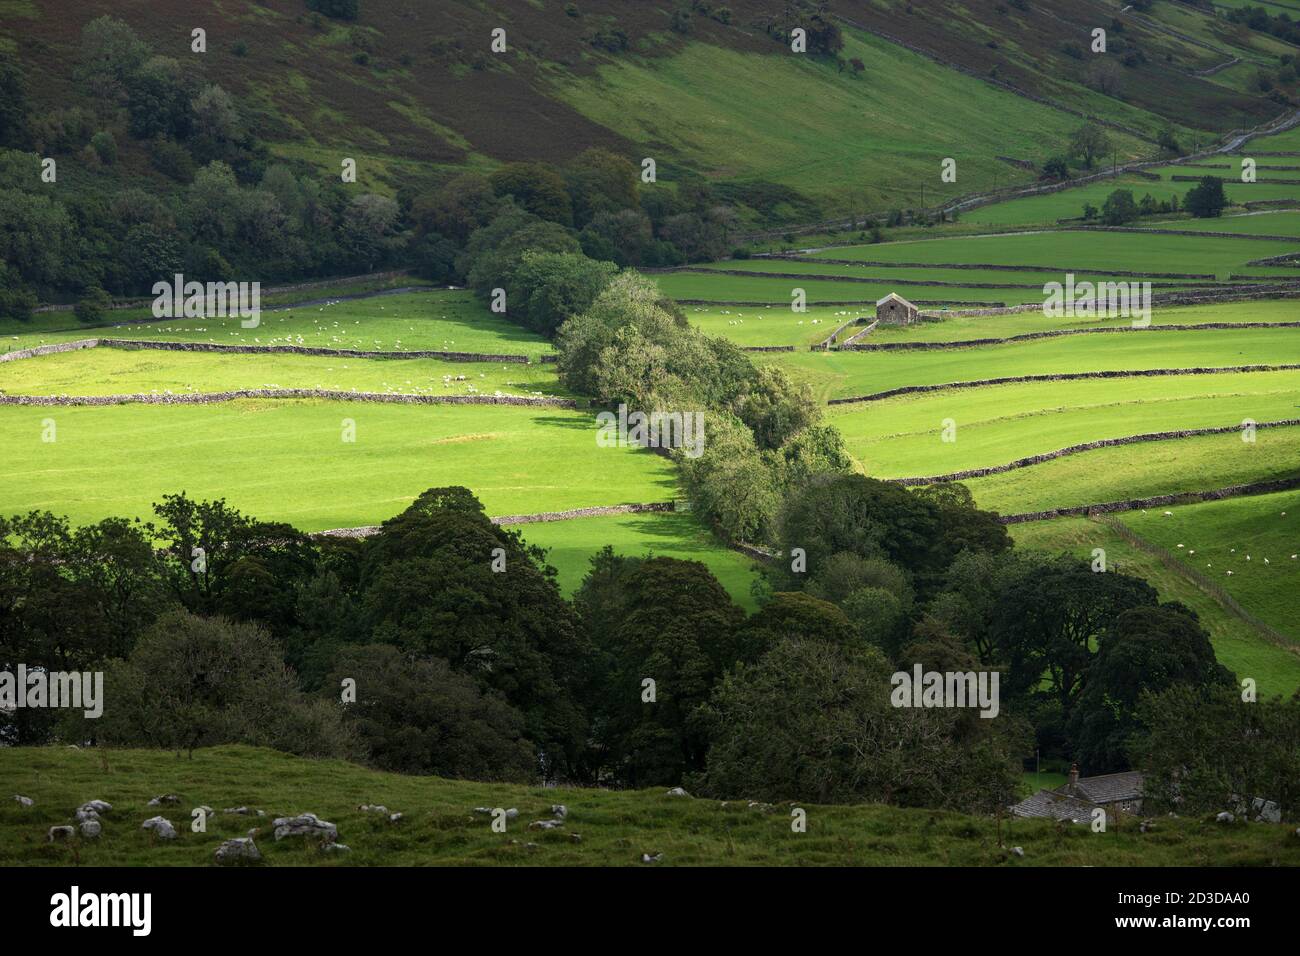 View over dry stone walls and the valley of Littondale from near Nether Hesleden, Halton Gill, North Yorkshire (Yorkshire Dales National Park. Summer Stock Photo